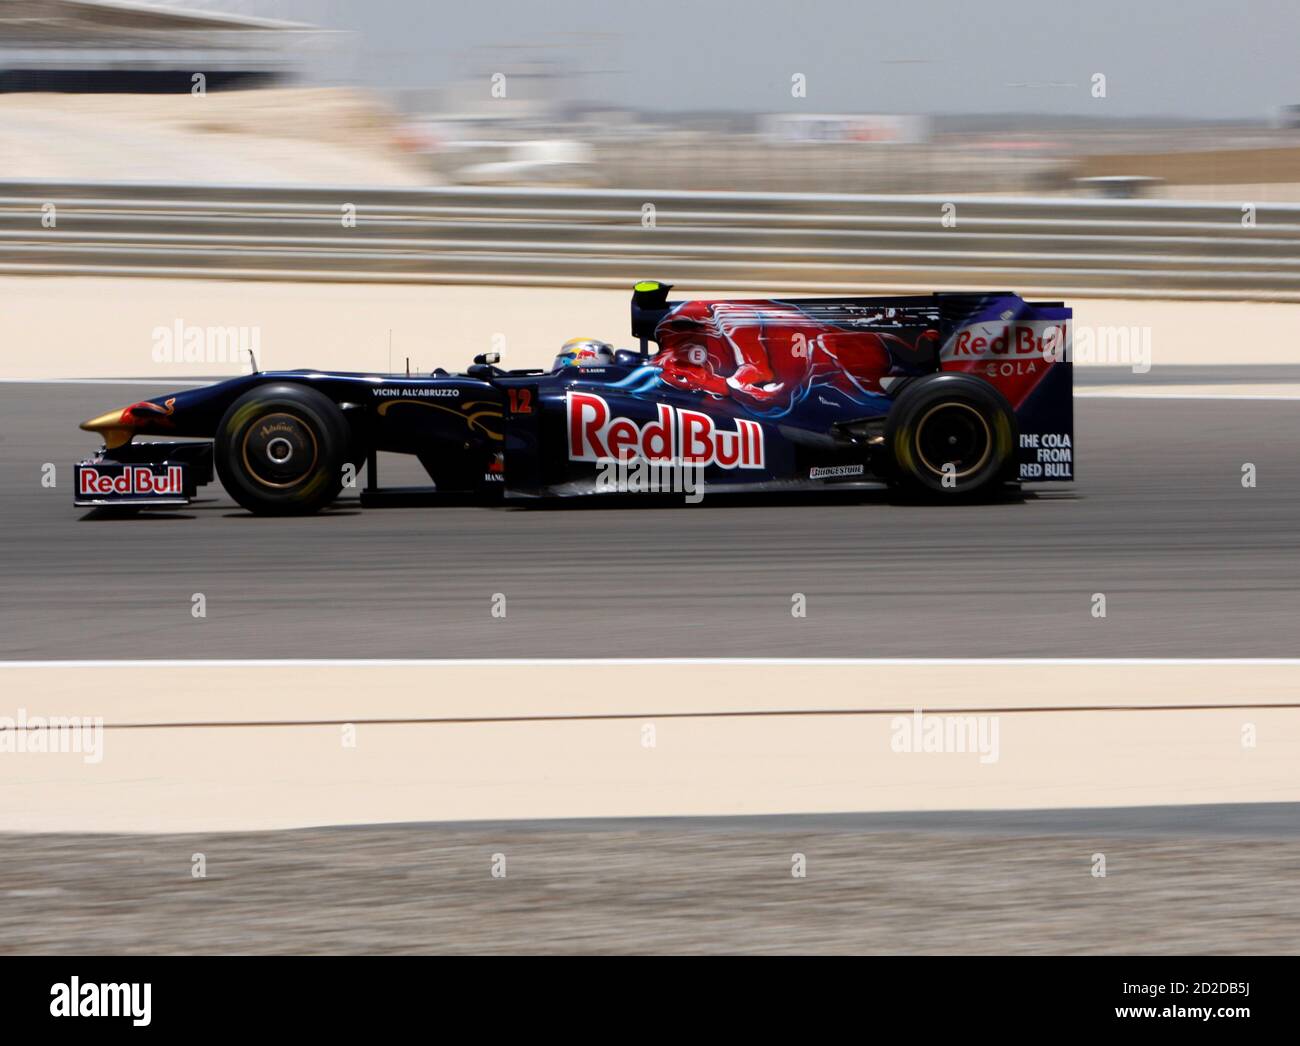 Toro Rosso Formula One driver Sebastien Buemi of Switzerland drives during  the first practice session of the Bahrain F1 Grand Prix in Manama April 24,  2009. REUTERS/Ahmed Jadallah (BAHRAIN Stock Photo - Alamy